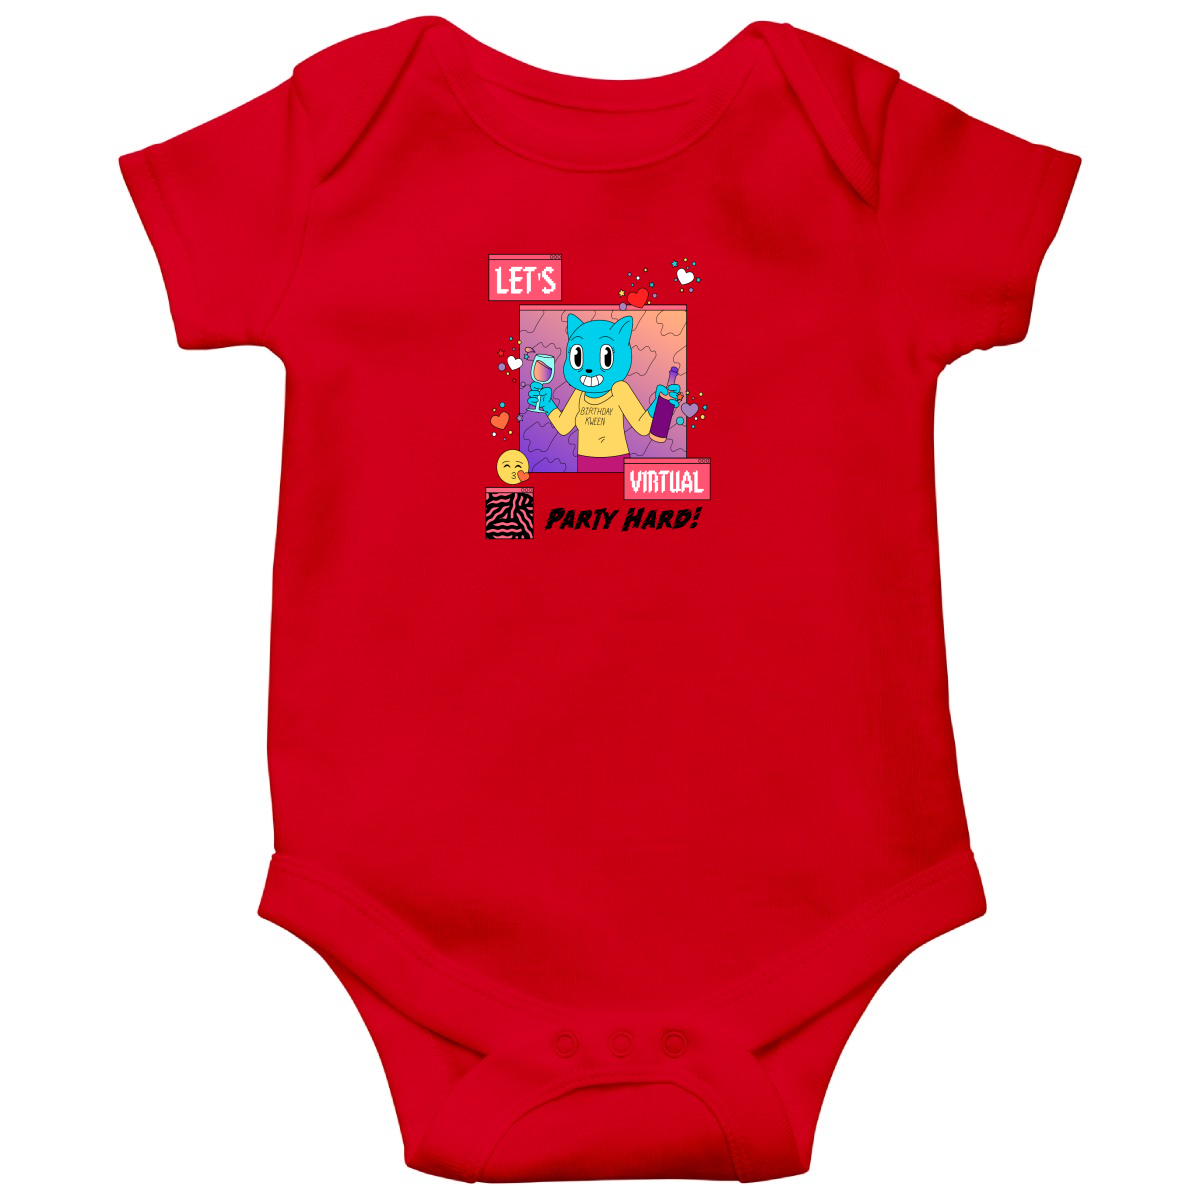 Happy Birthday Let's Virtual Party Baby Bodysuits | Red